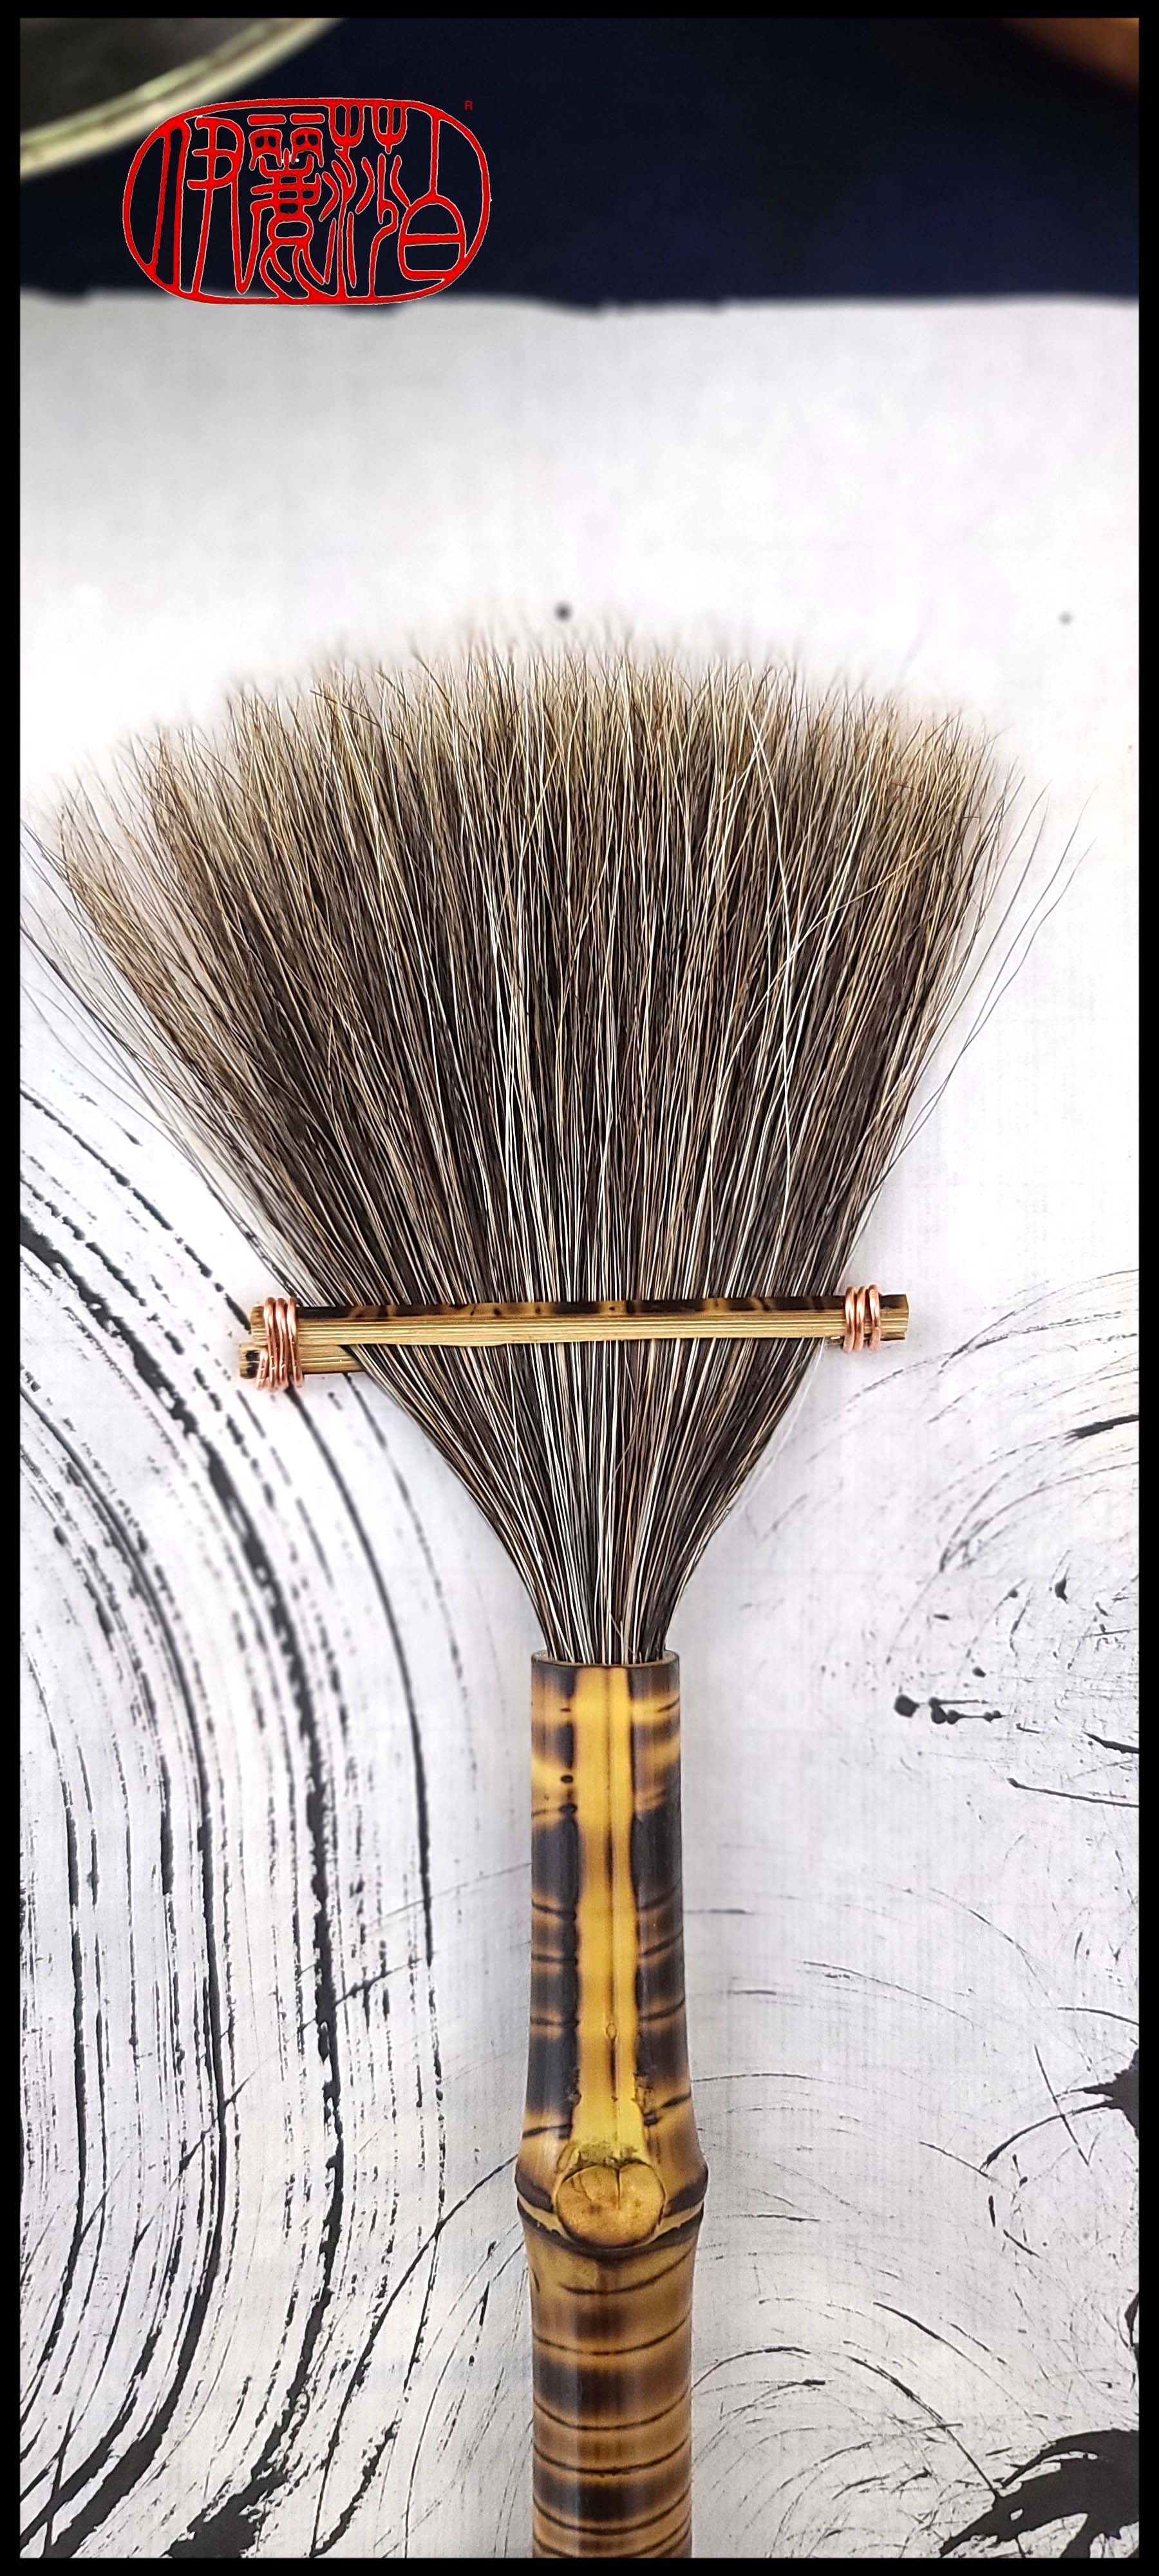 Handmade Fan Brush With Horsehair Bristles and Bamboo Handle